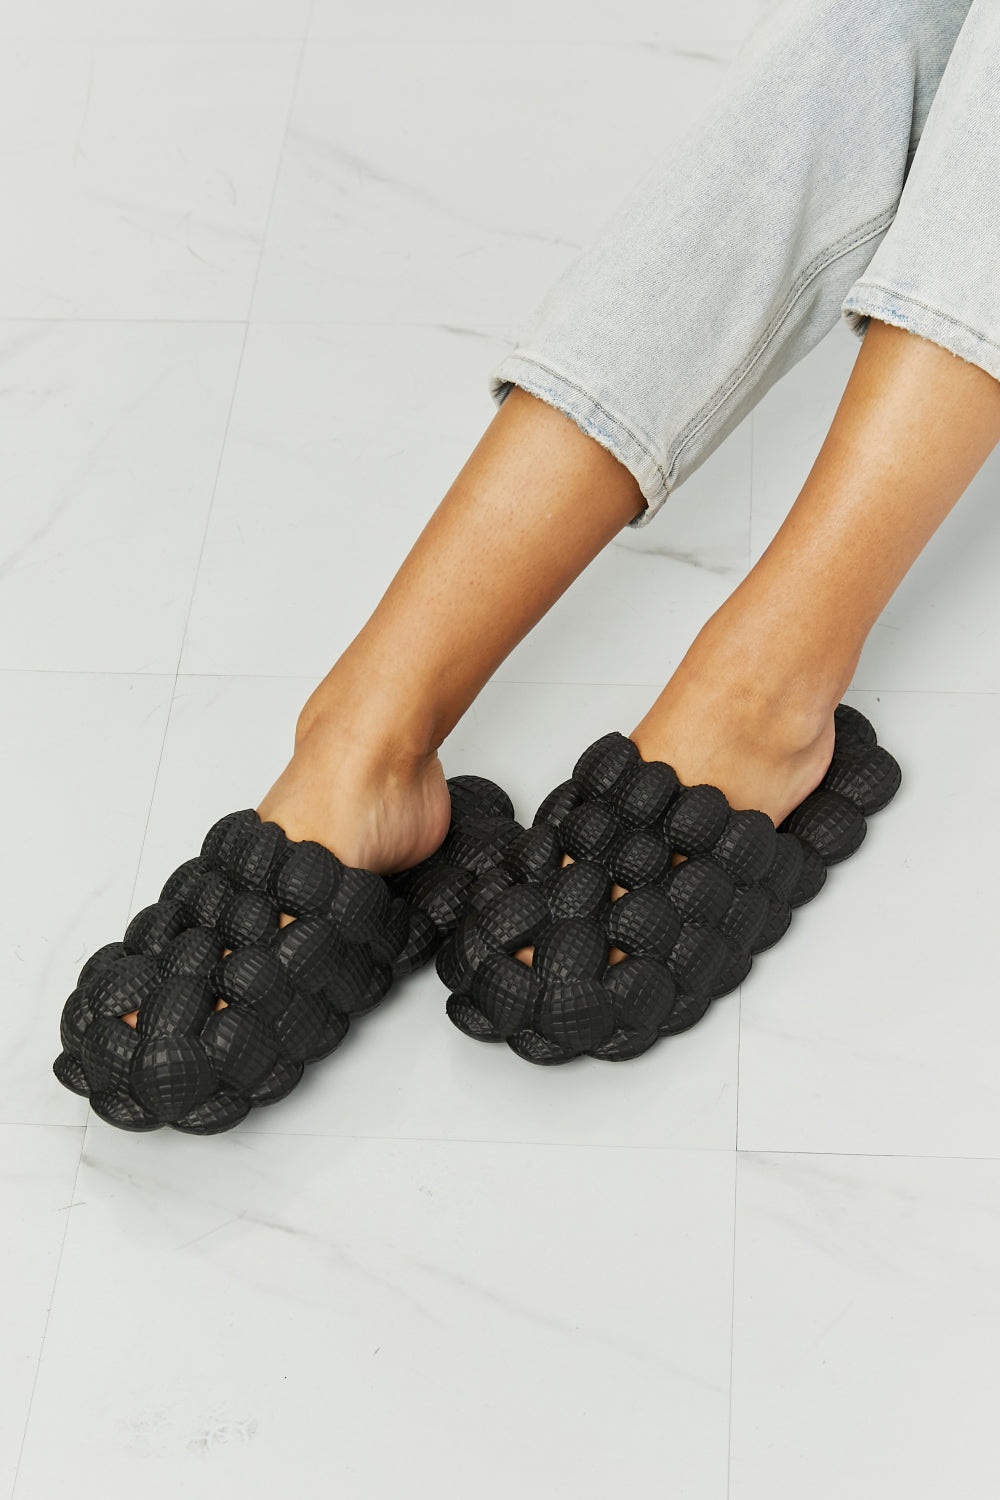 NOOK JOI Laid Back Bubble Slides in Black free shipping -Oh Em Gee Boutique